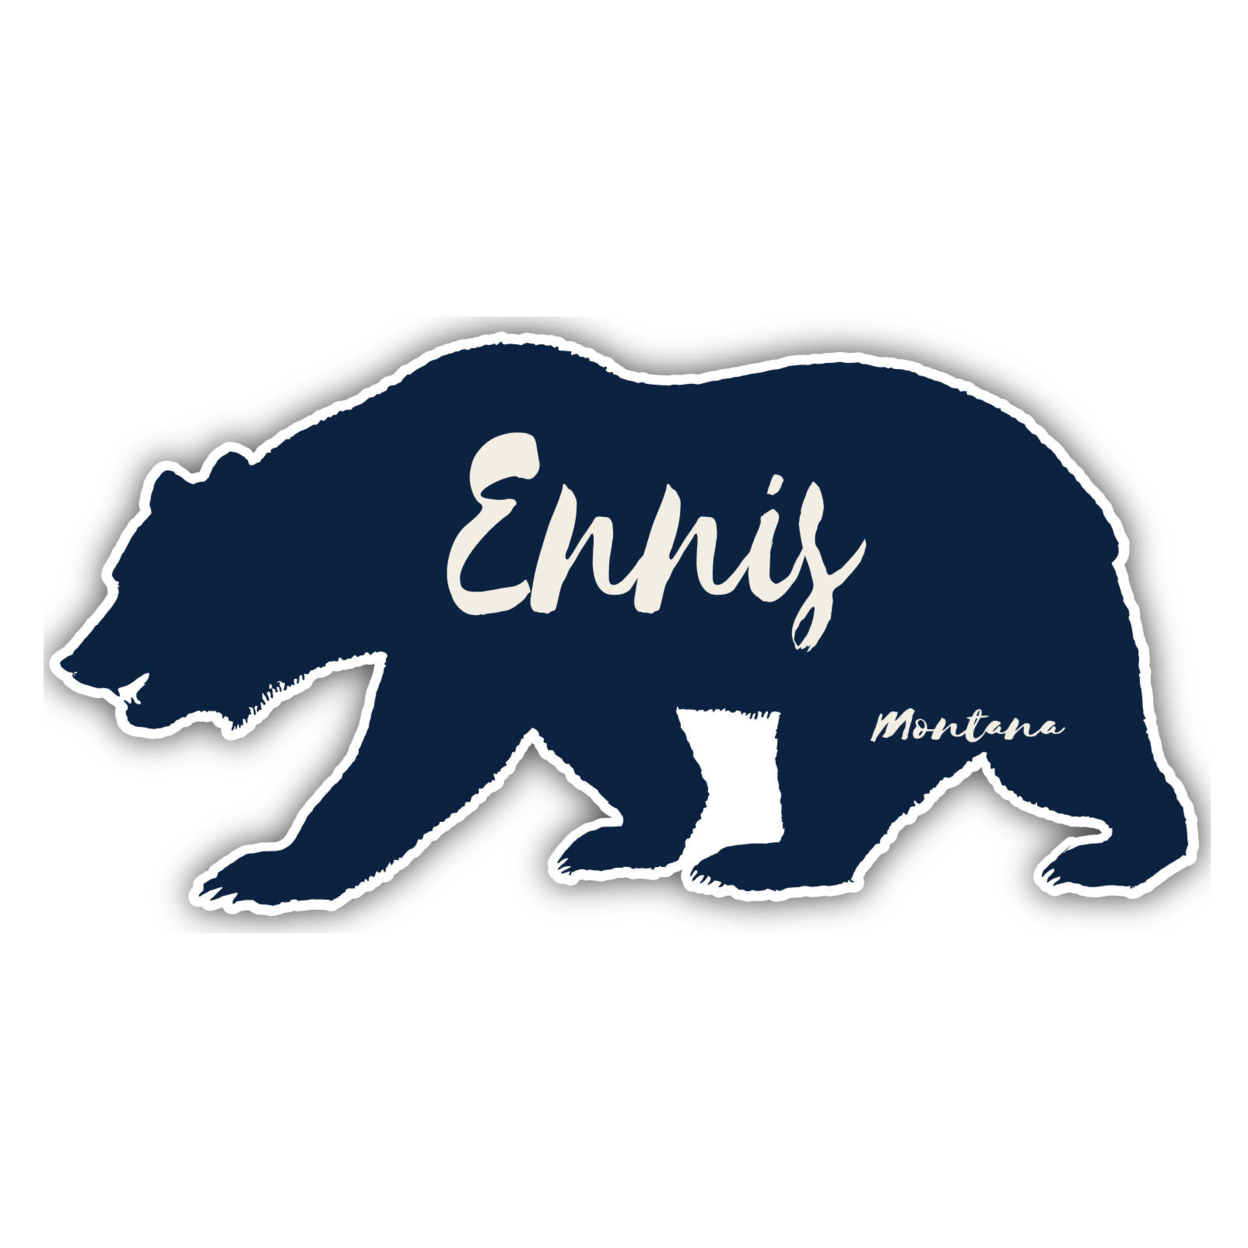 Ennis Montana Souvenir Decorative Stickers (Choose Theme And Size) - 4-Pack, 12-Inch, Great Outdoors